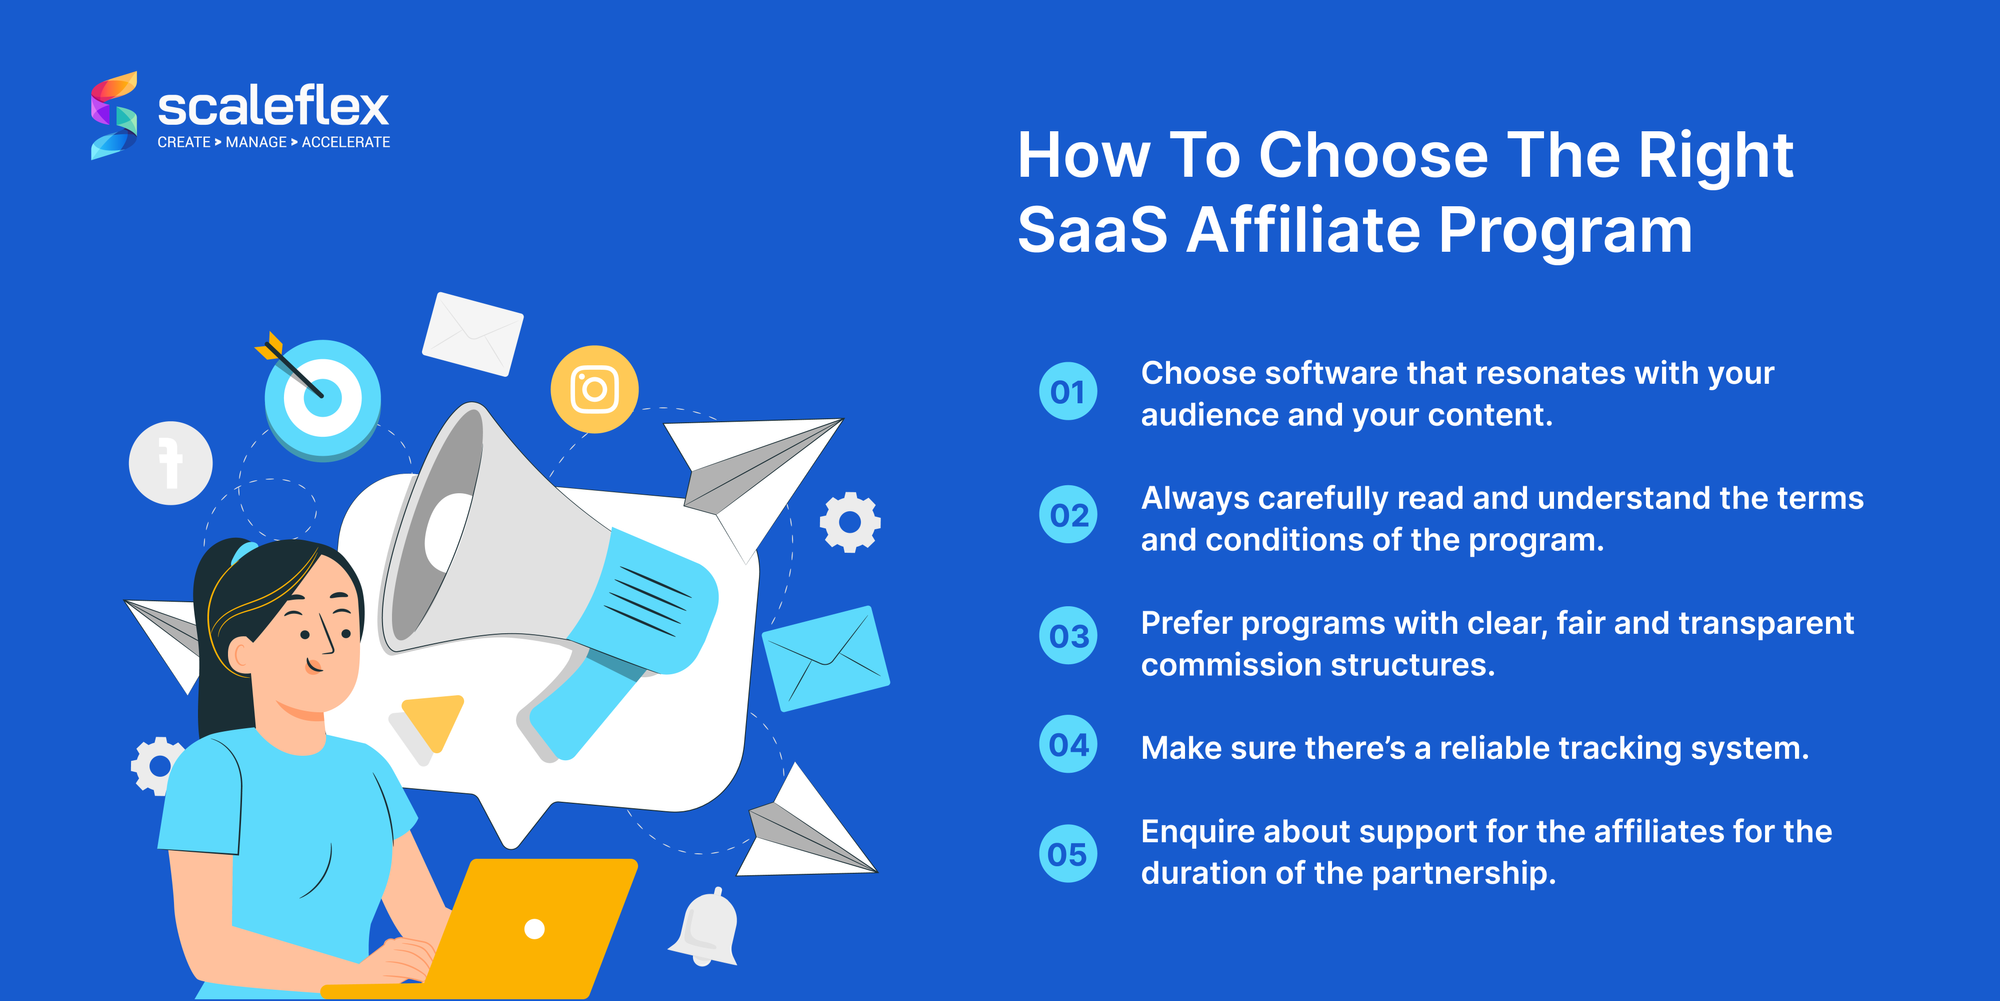 Discover which are the essential elements to take into account when making your choice of a SaaS Affiliate Program.